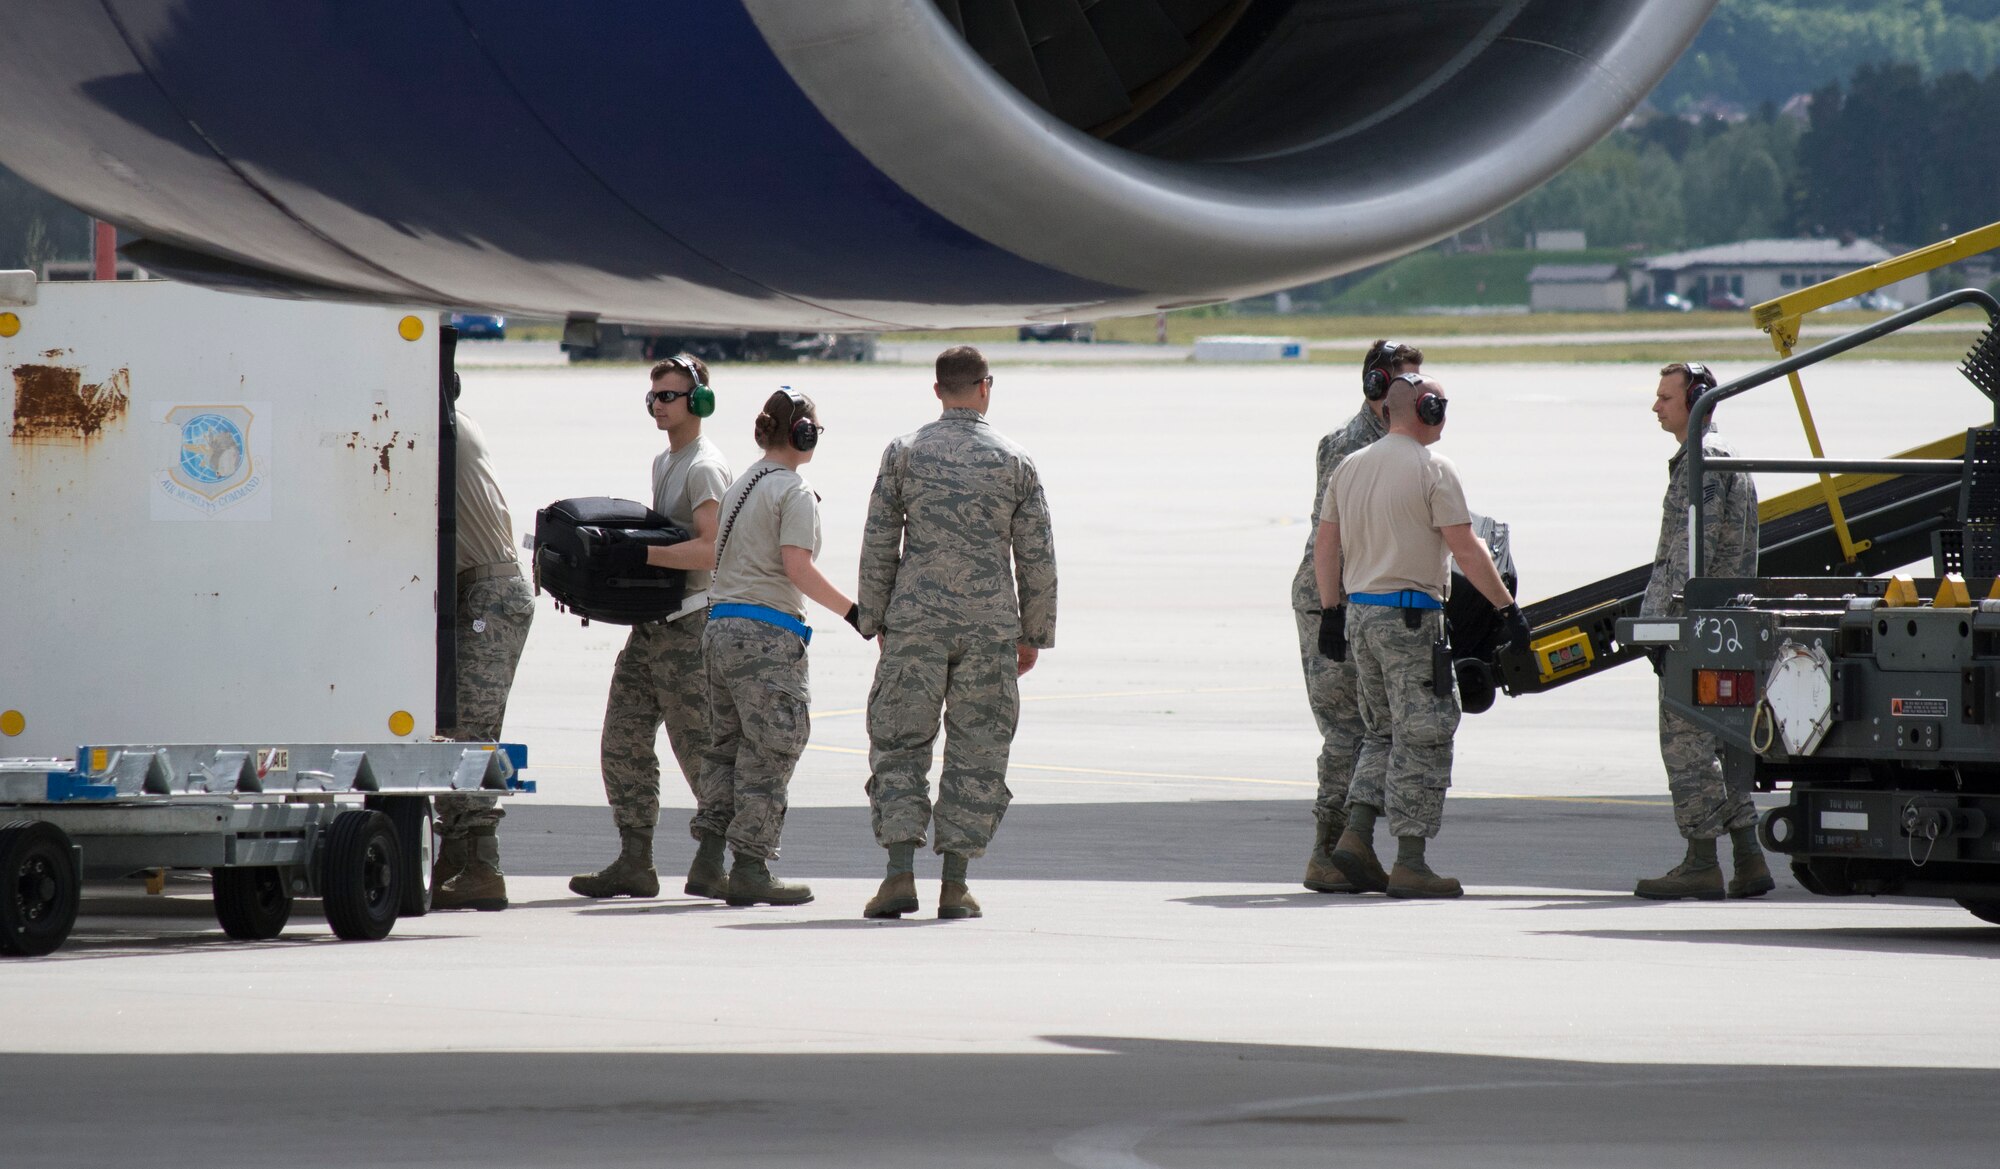 Airman 1st Class Patrick J. Lokhaiser (left), an air transportation specialist with 32nd Aerial Port Squadron, and his active-duty counterparts from the 721st APS, unload passenger luggage from a Boeing 747on the flight line at Ramstein Air Base, Germany, May 6, 2015. Careful handling of passenger luggage ensures travelers receive their belongings in the same condition as when they were packed. (U.S. Air Force photo by Staff Sgt. Brandy Grace)